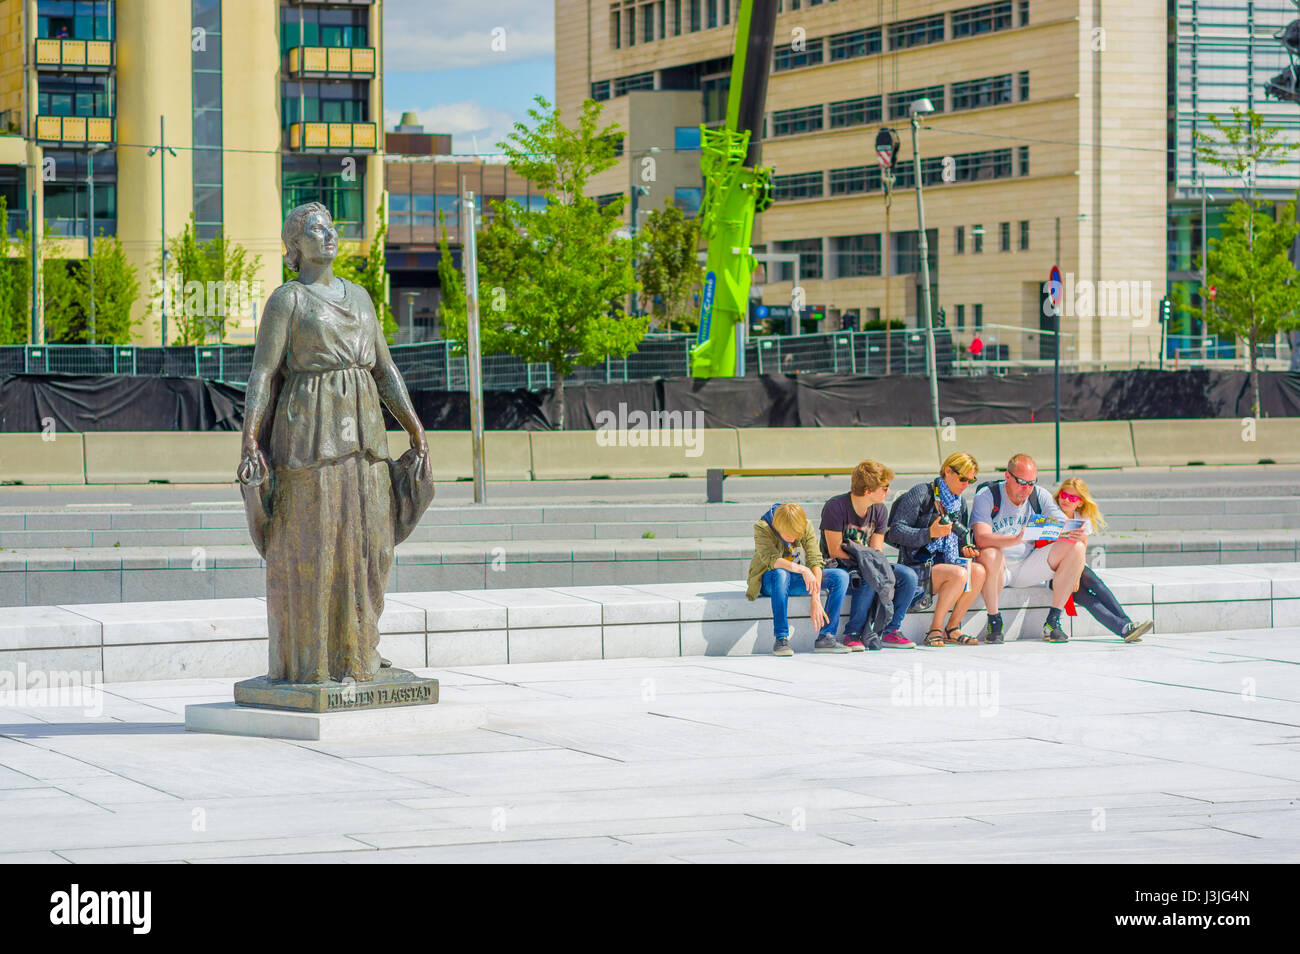 OSLO, NORWAY - 8 JULY, 2015: Beautiful statue showing Kirsten Flagstad located in front of landmark opera house. Stock Photo